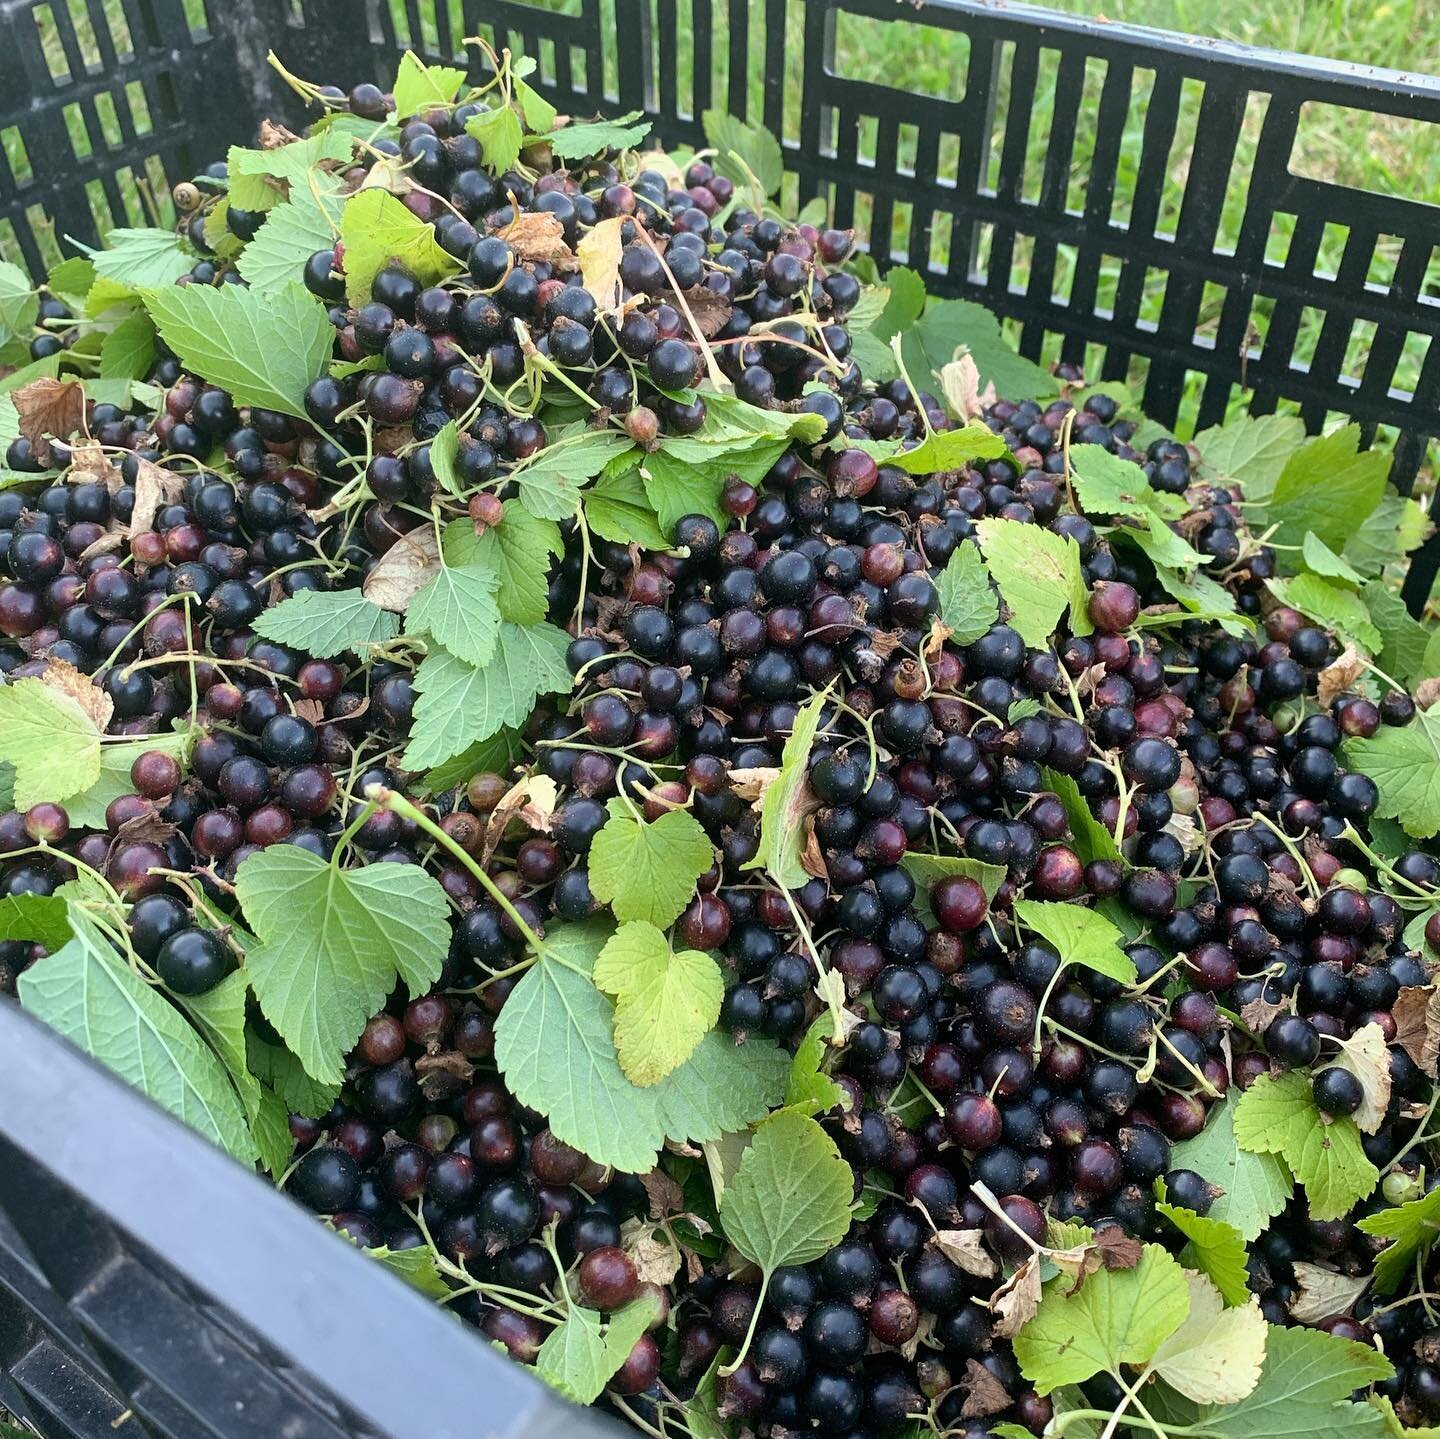 Our delicious black currant harvest! Stay tuned for pictures of our currant jam.
#currant #currantjam #ournewwaygarden #garden #food #delicious #jam #community